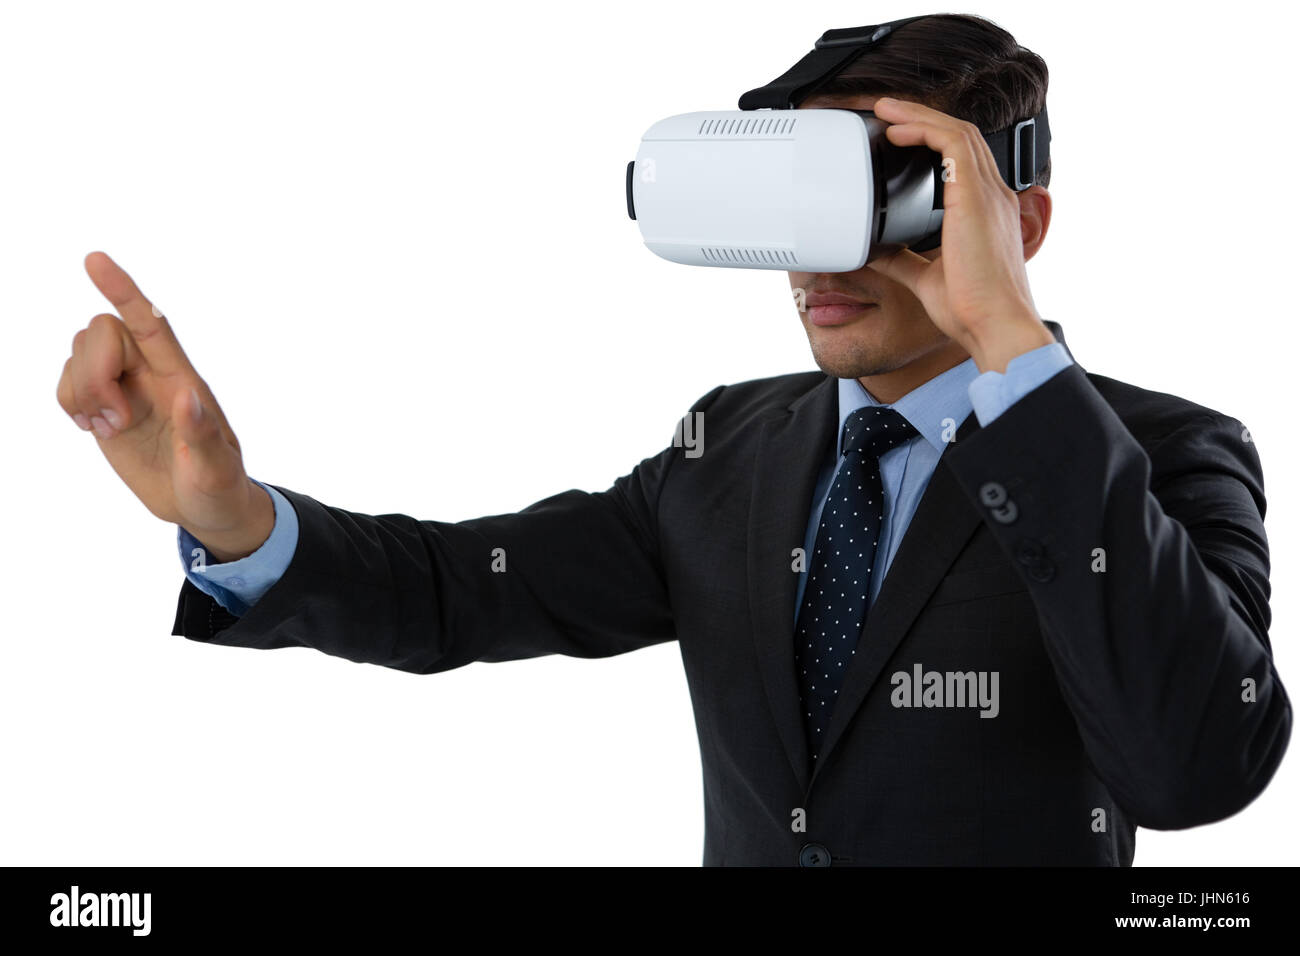 Businessman gesturing while using vr glasses against white background Stock Photo